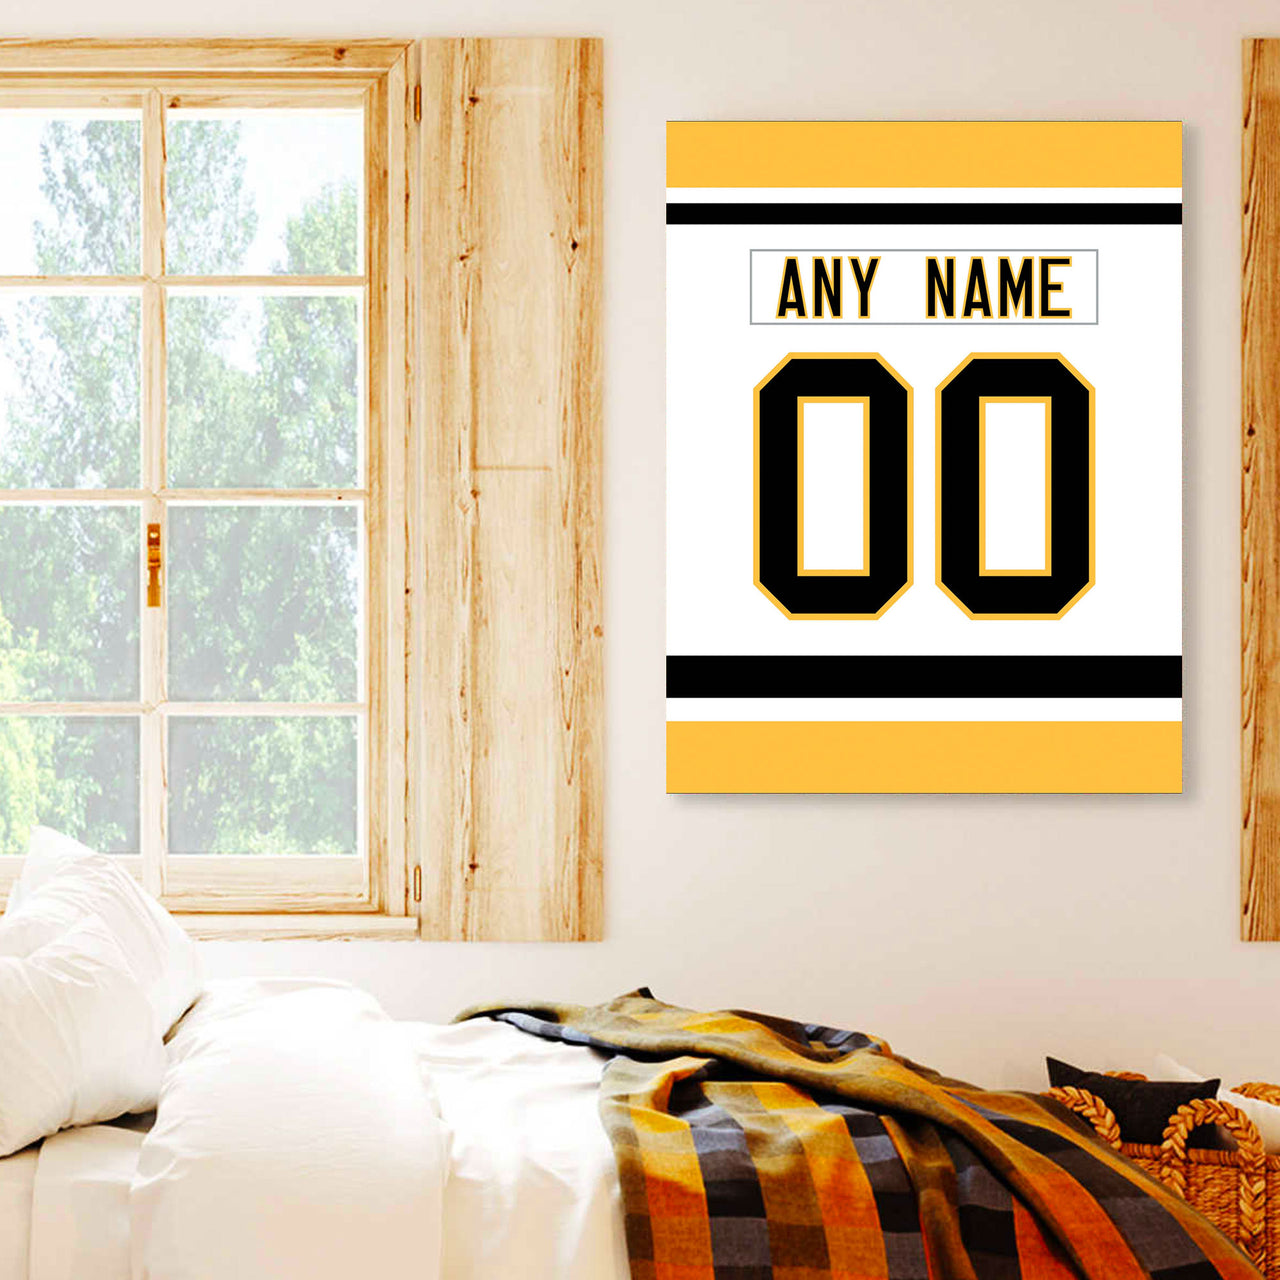 Pittsburgh Penguins Jerseys, and Gear  Personalized Pittsburgh Penguins  Jerseys - Penguins Store